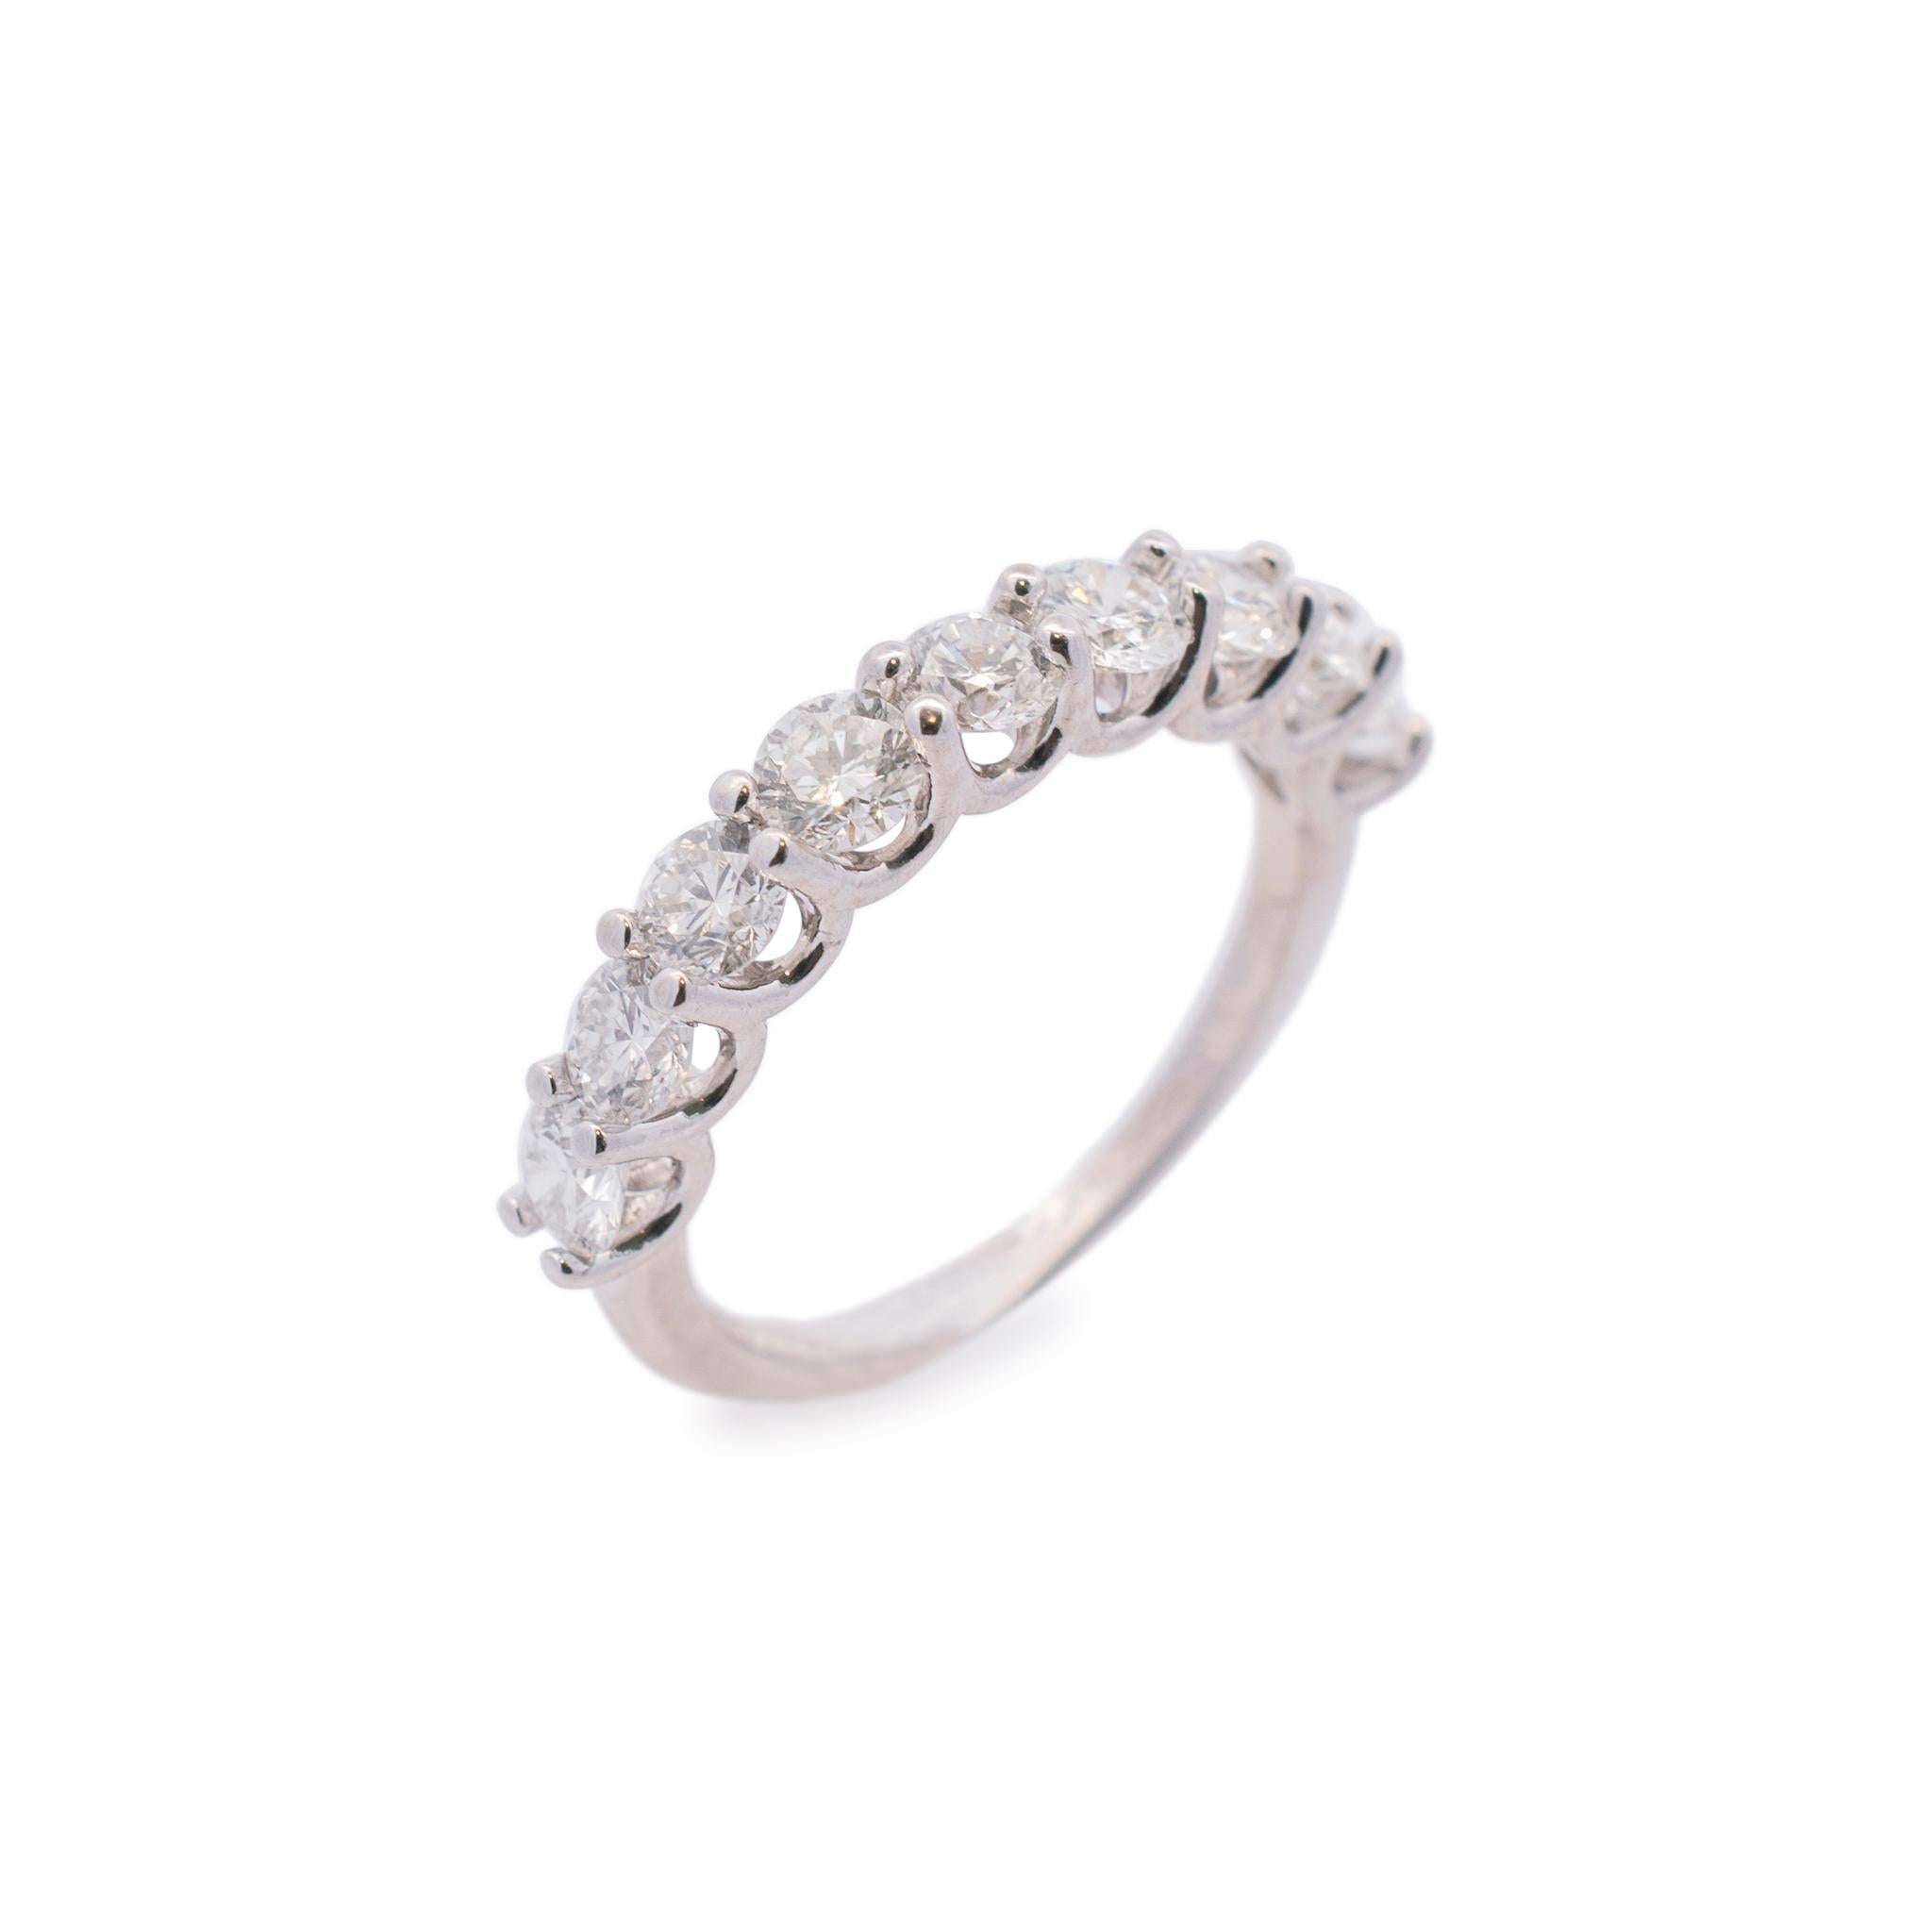 Gender: Ladies

Metal Type: 14K White Gold

Ring Size: 6

Total Weight: 2.66 grams

Shank Width: 2.00mm

14K white gold nine-across, diamond wedding, semi-eternity band with a half-round shank. Engraved with 